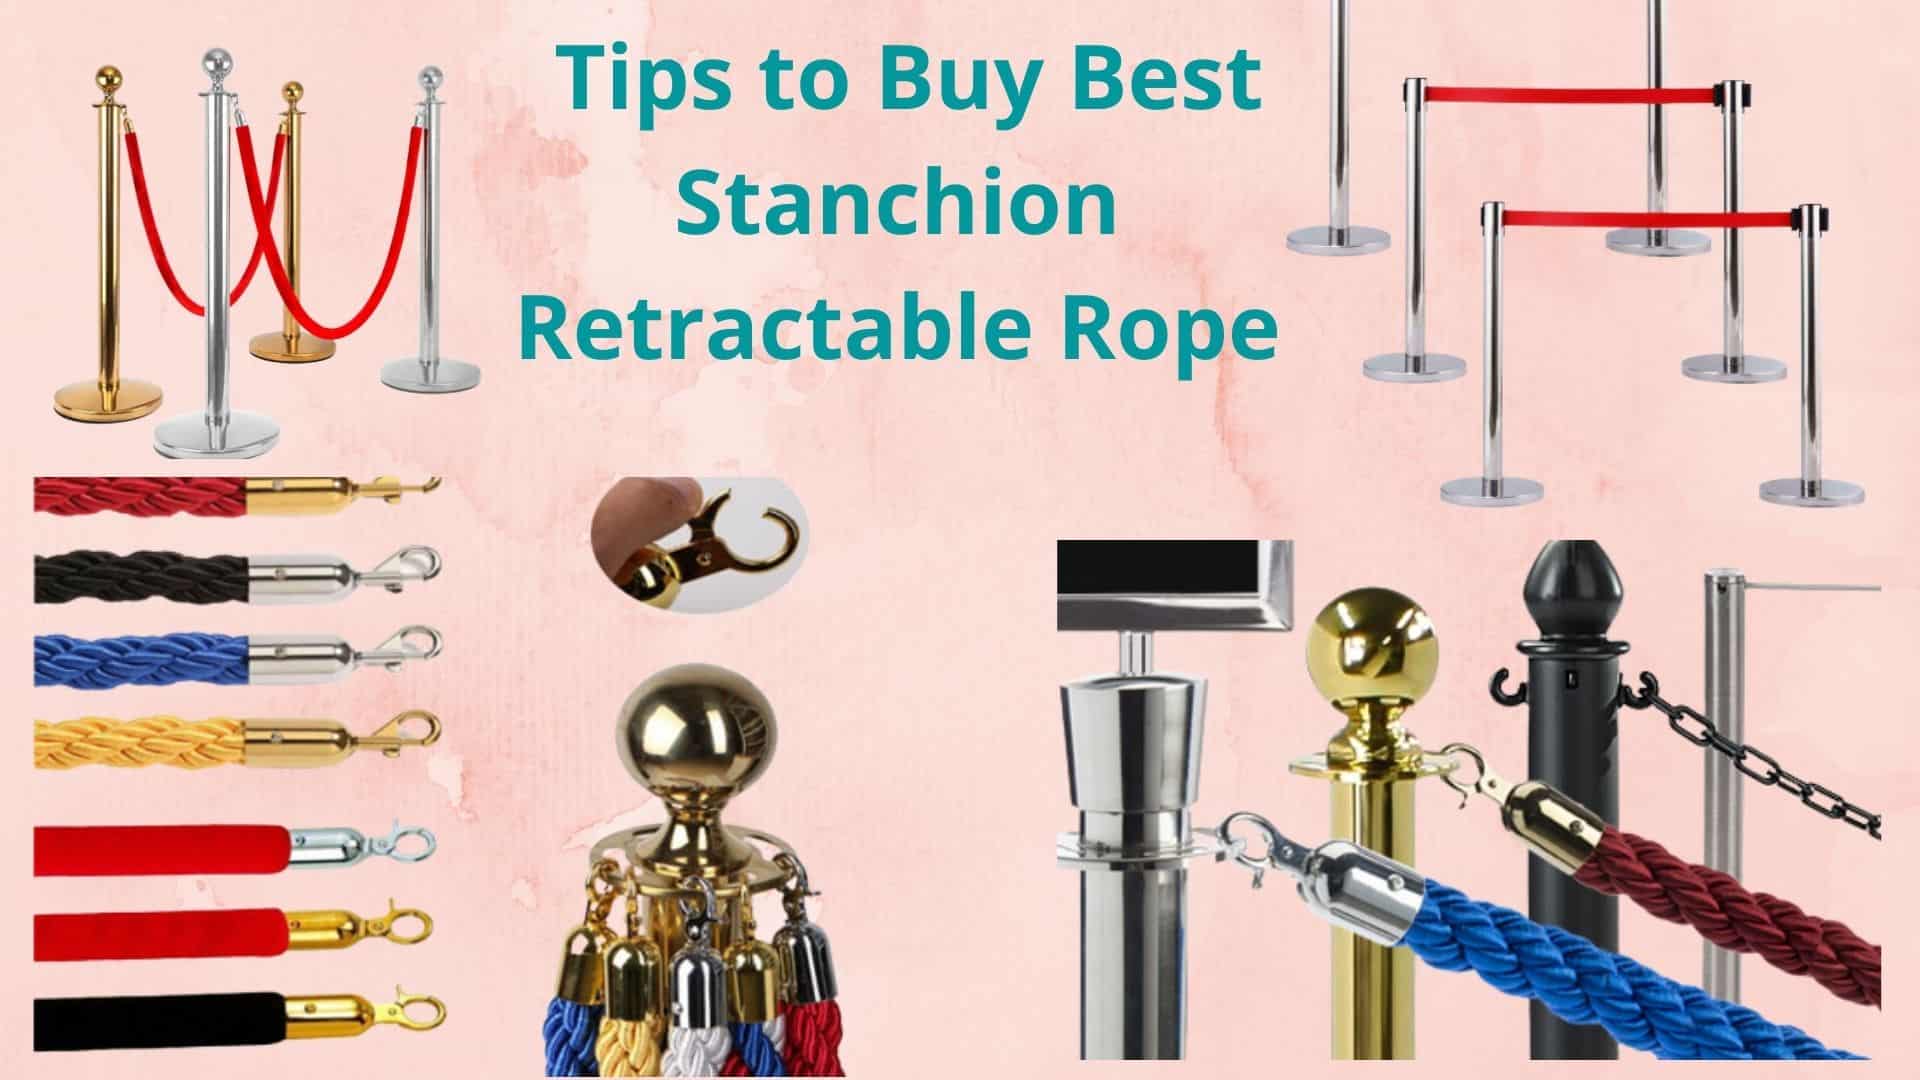 Stanchion Retractable Rope